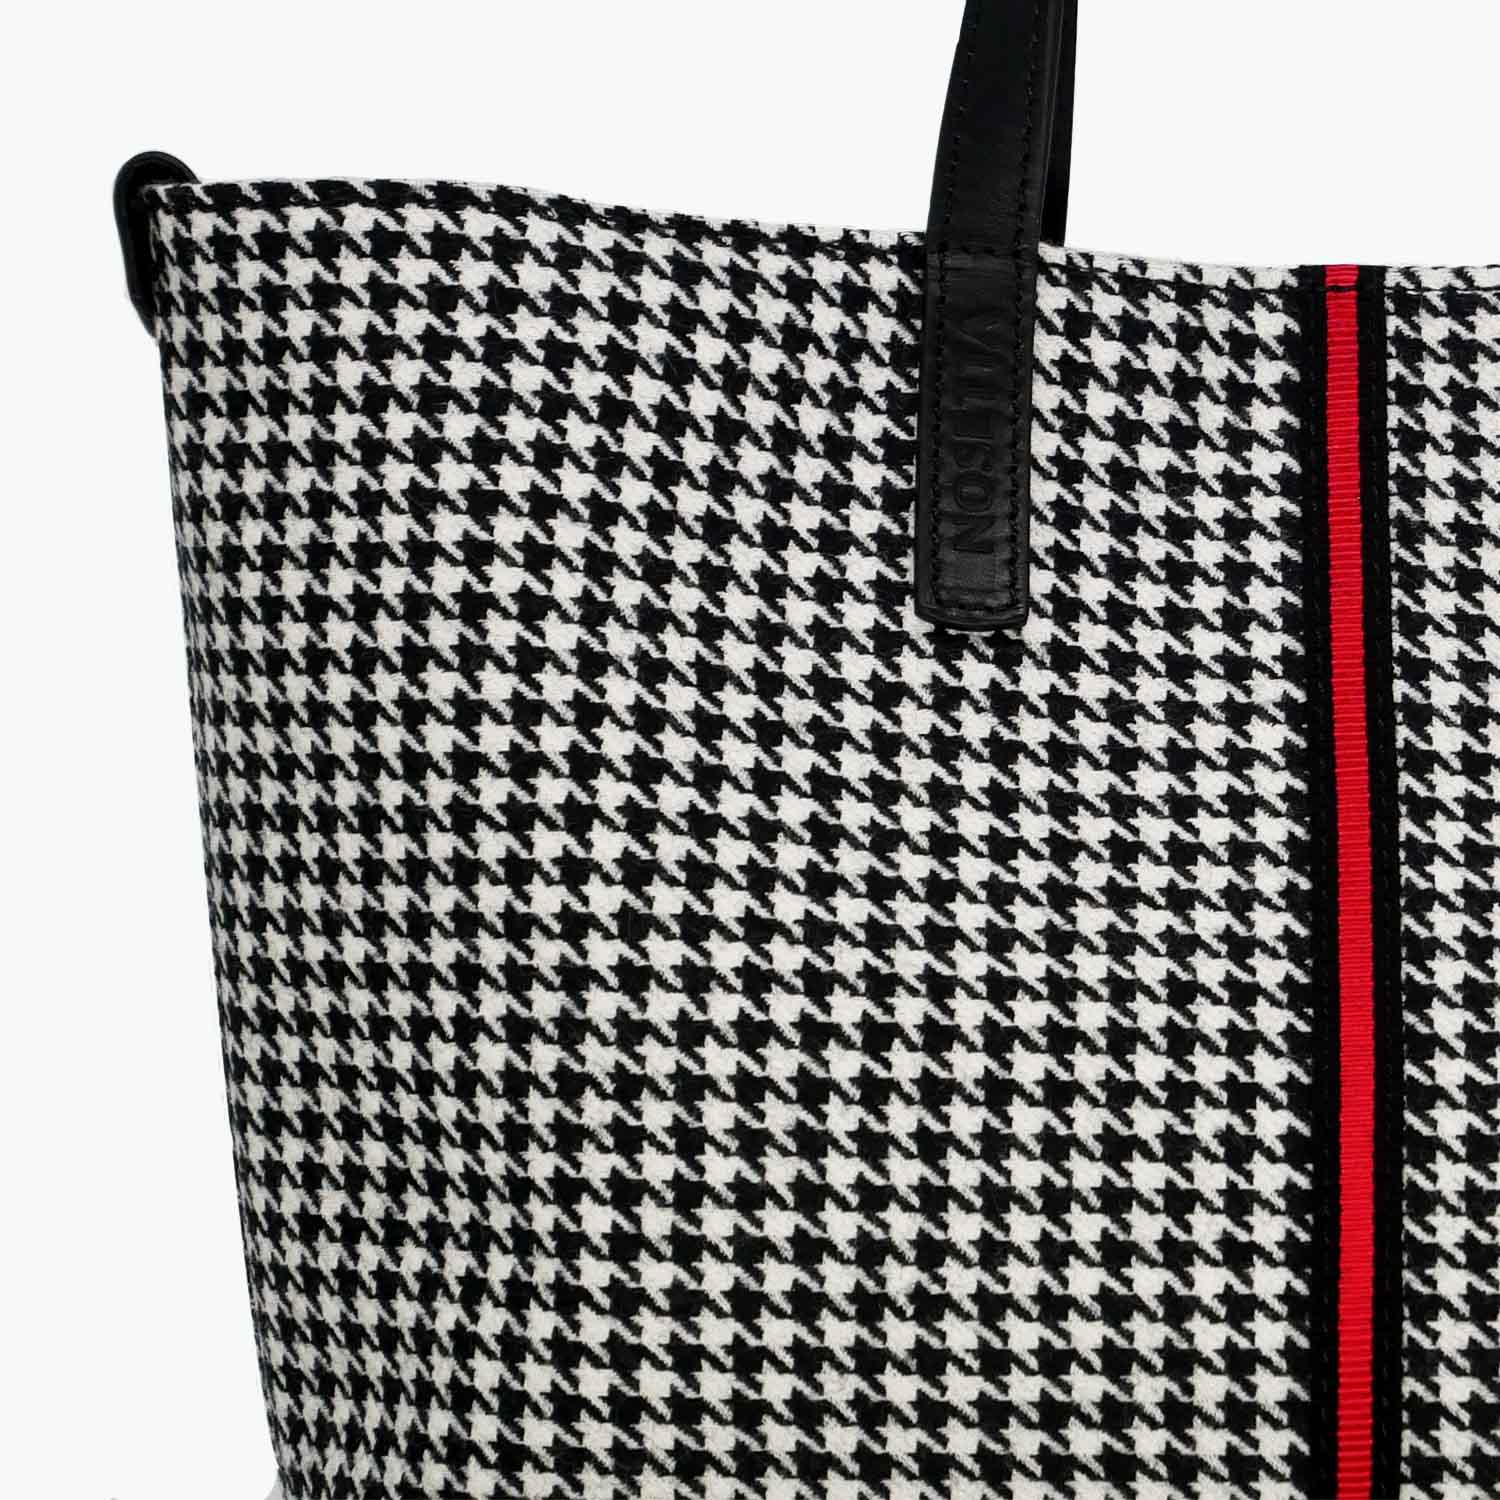 Ralph Lauren Black/White Canvas and Leather Houndstooth Tote